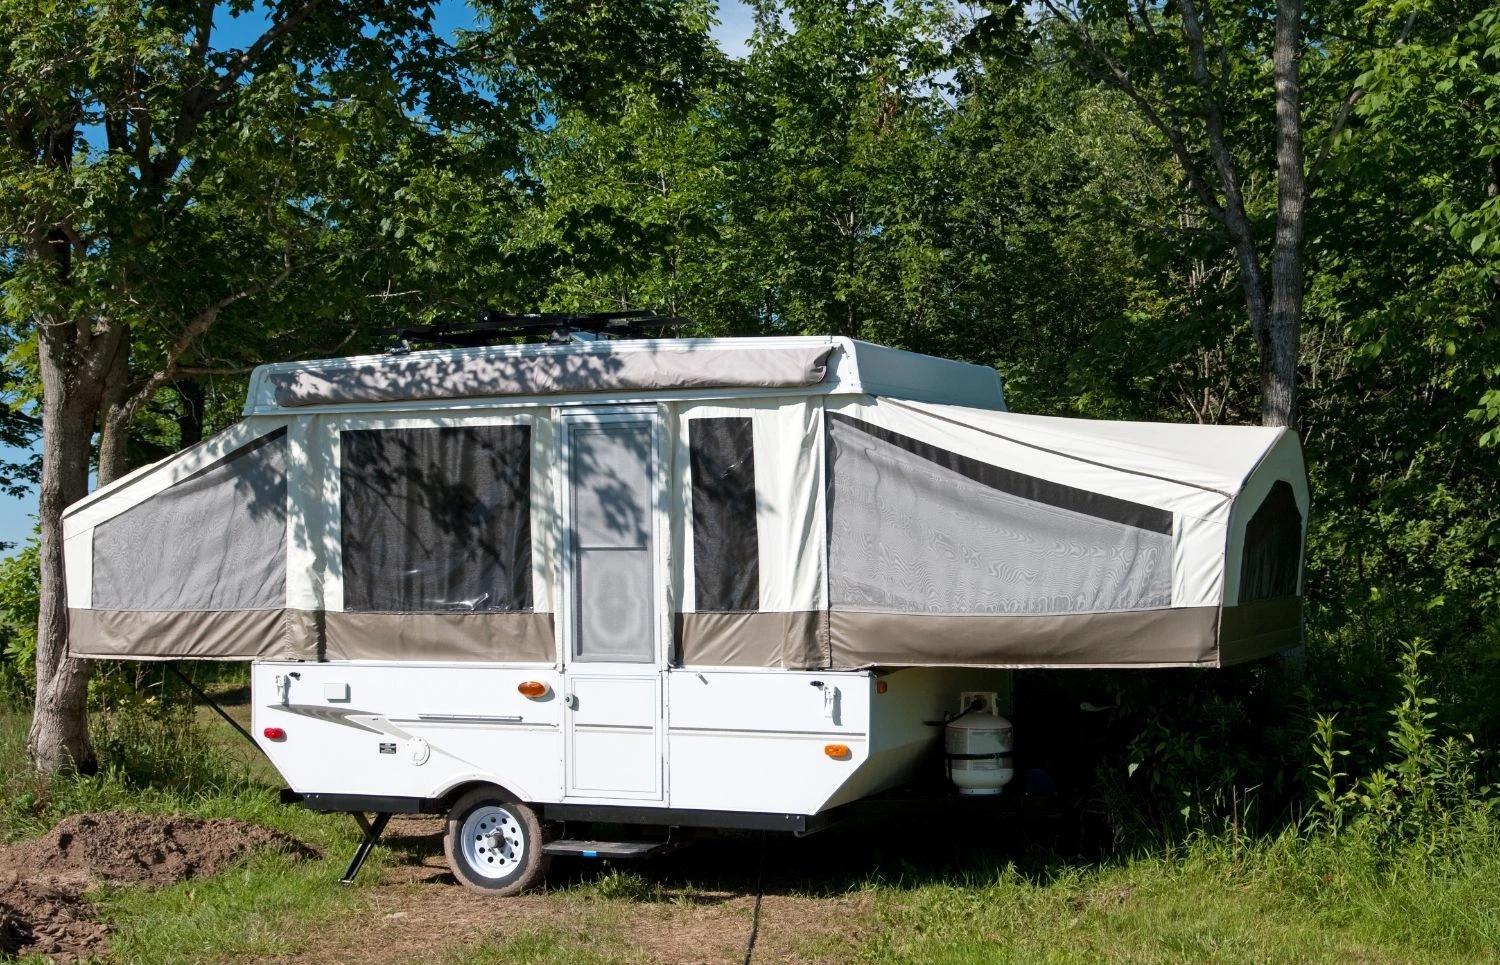 lateral view of a tent trailer